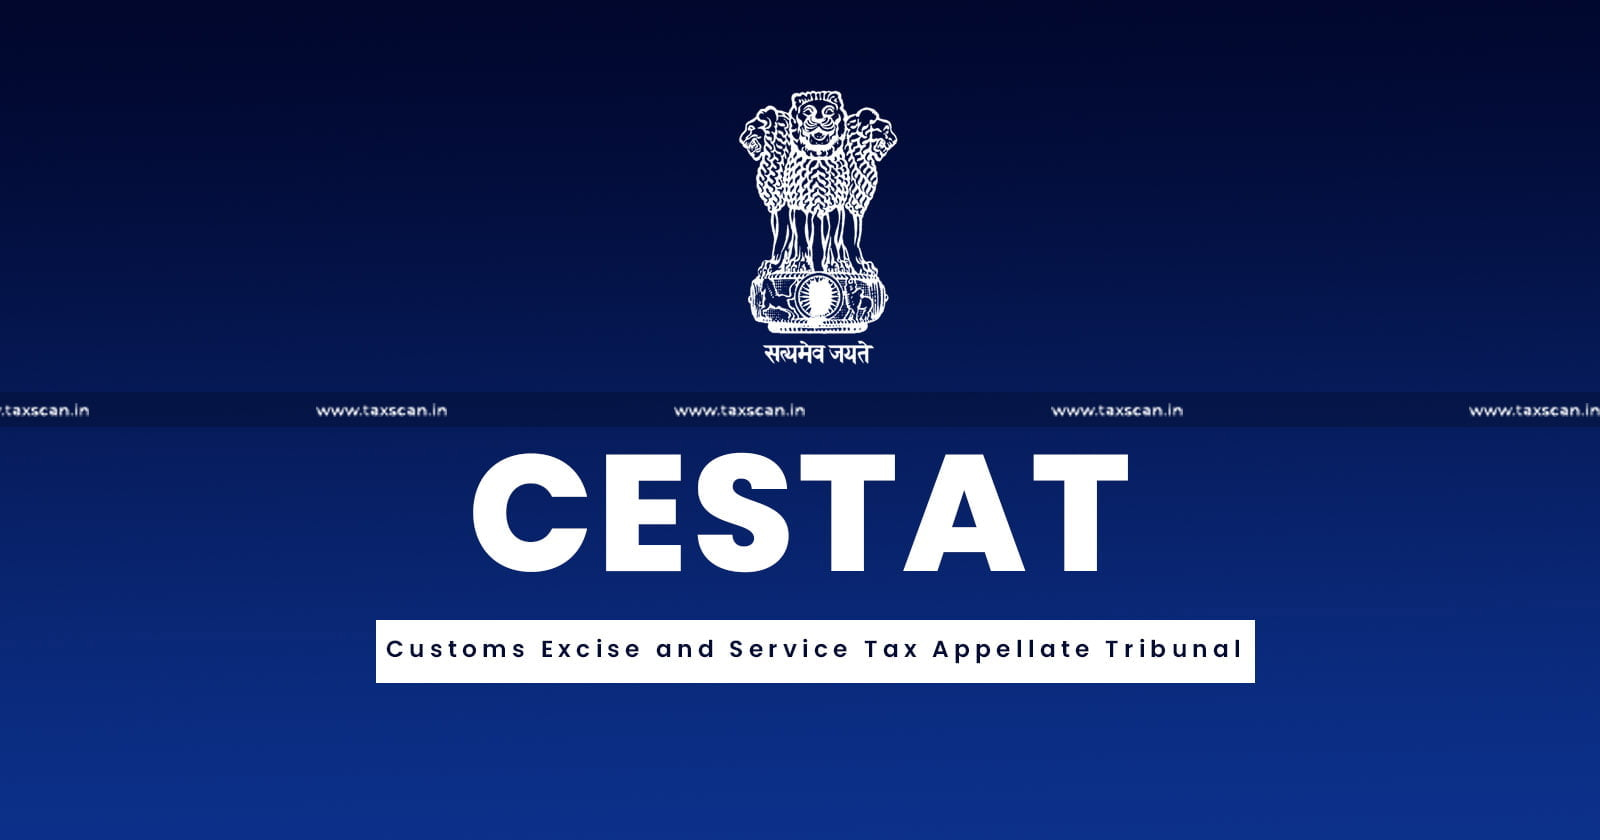 No penalty under Central Excise Rule - Malafide Intention -Evade Duty - CESTAT - taxscan